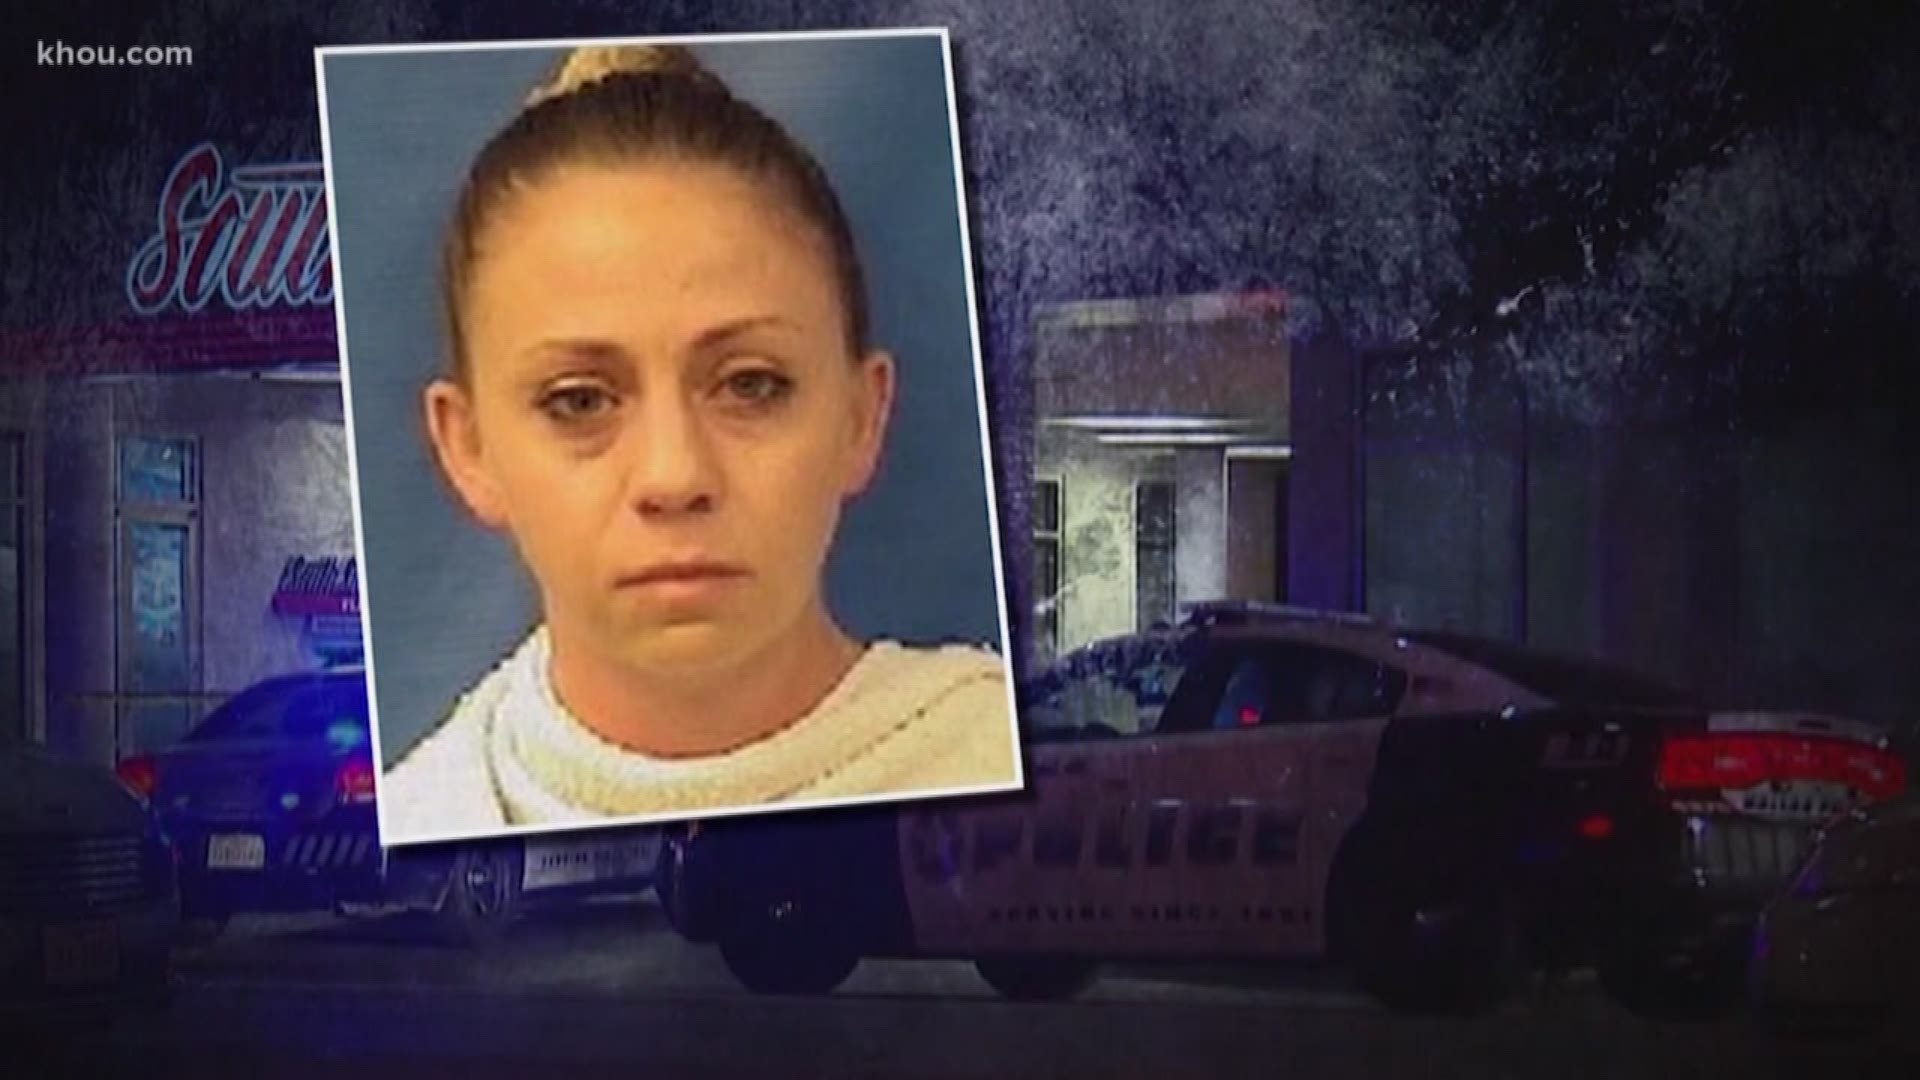 Amber Guyger, a former Dallas officer was convicted of shooting and killing her neighbor, Botham Jean, after she said she mistakenly walked into his apartment.